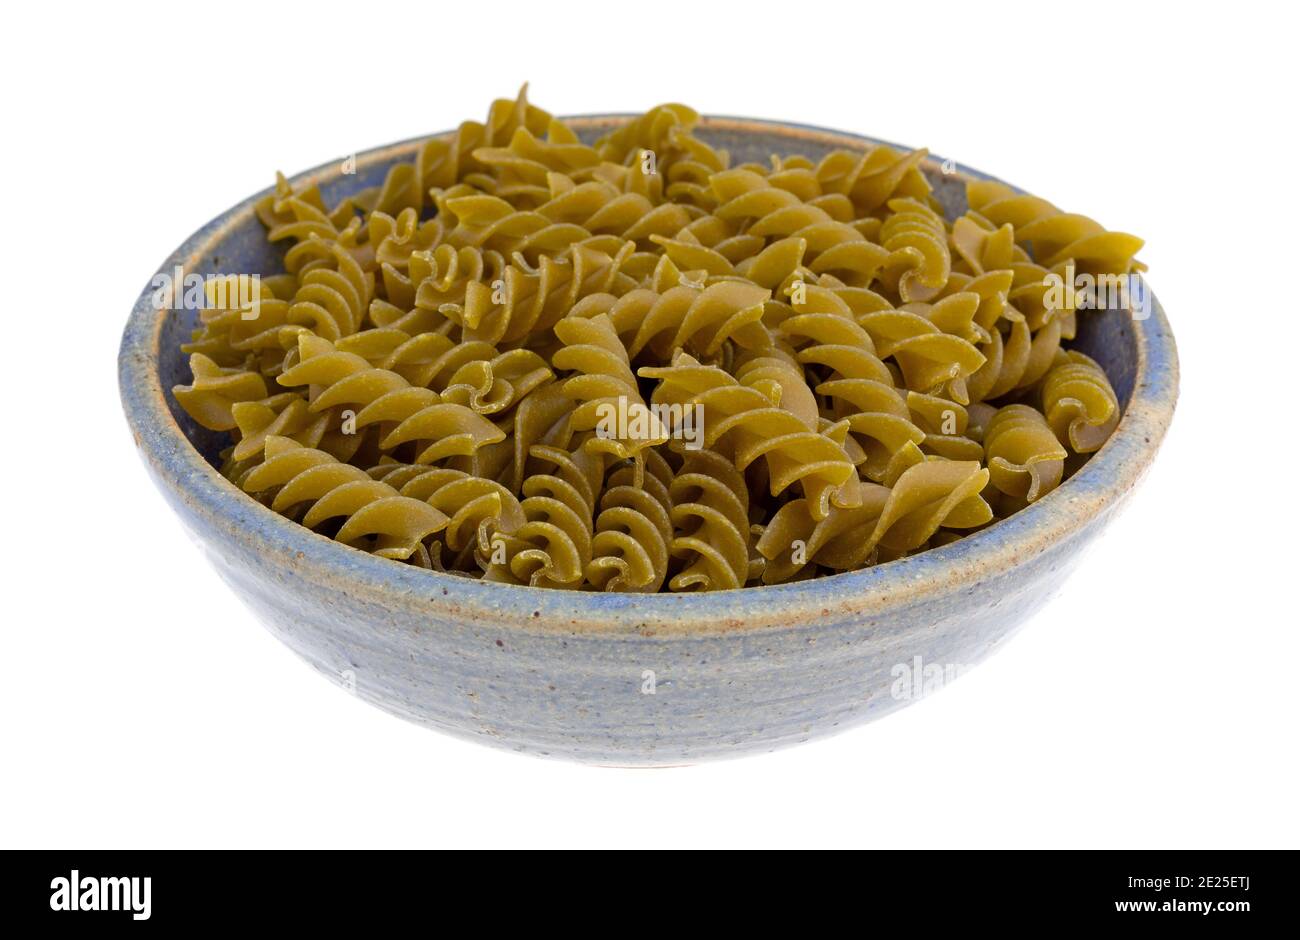 Side view of a serving of a serving of green pea fusilli in an old blue stoneware bowl isolated on a white background. Stock Photo